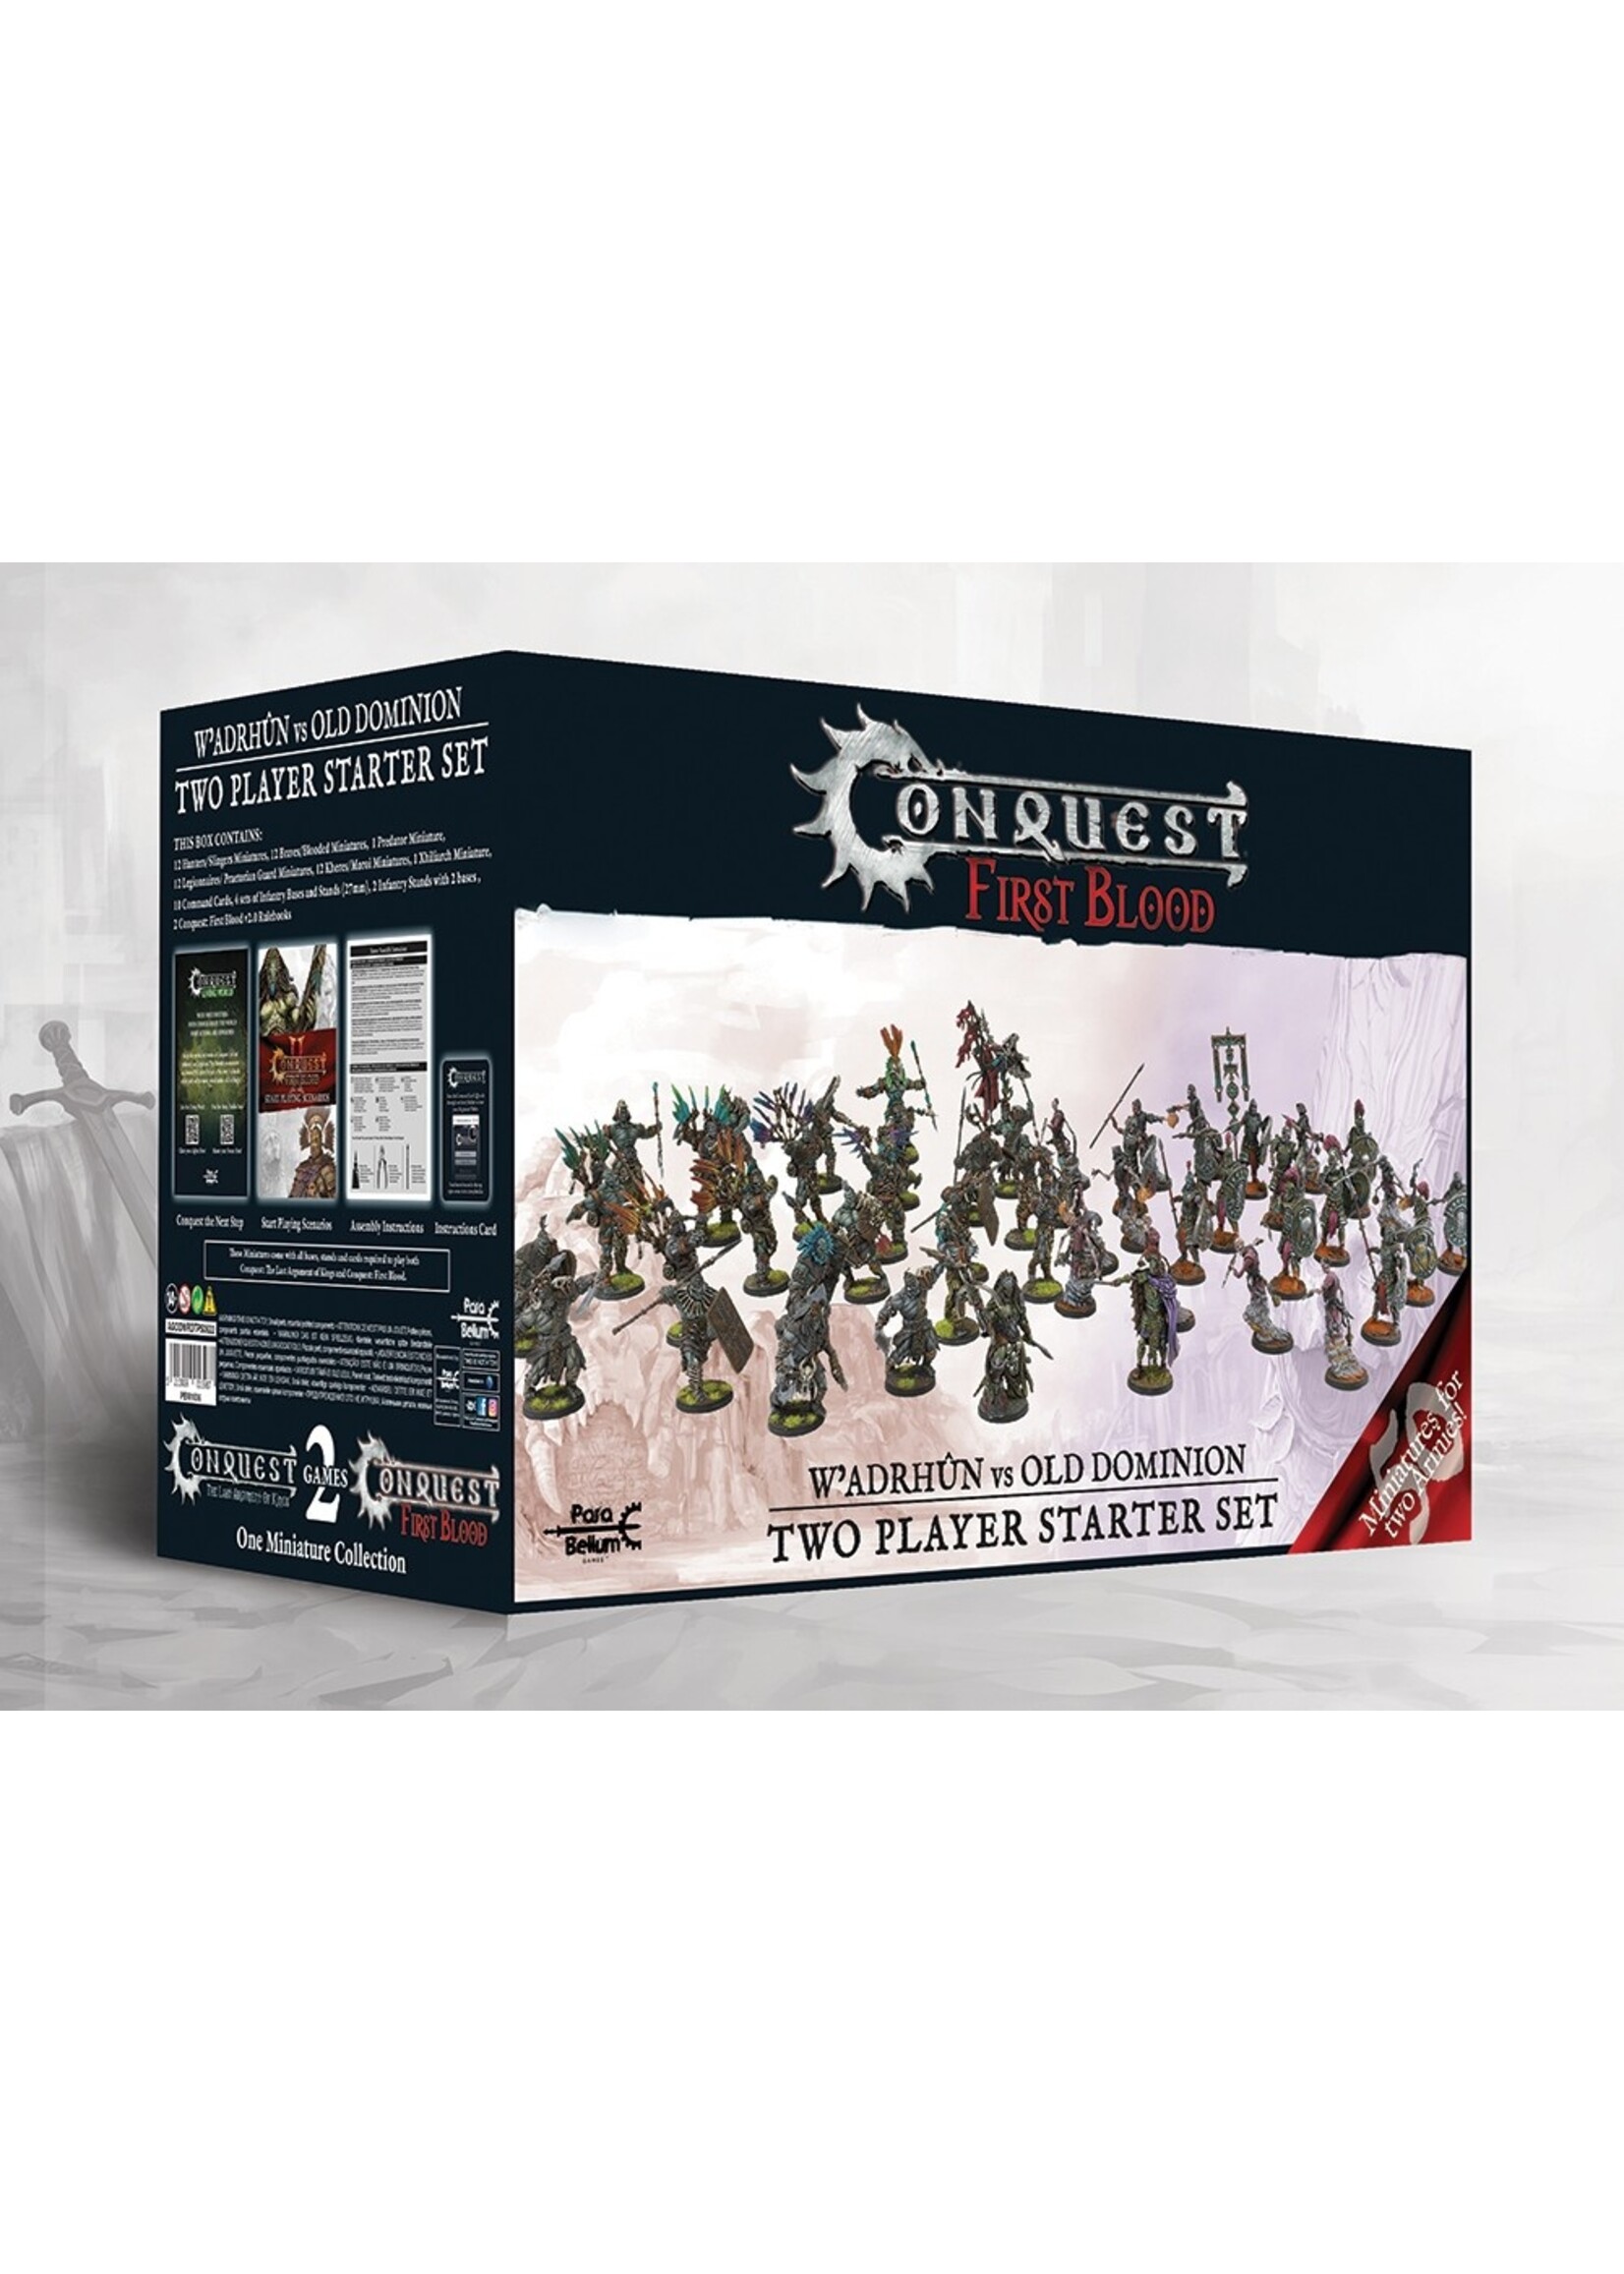 Conquest First Blood: Two player Starter Set